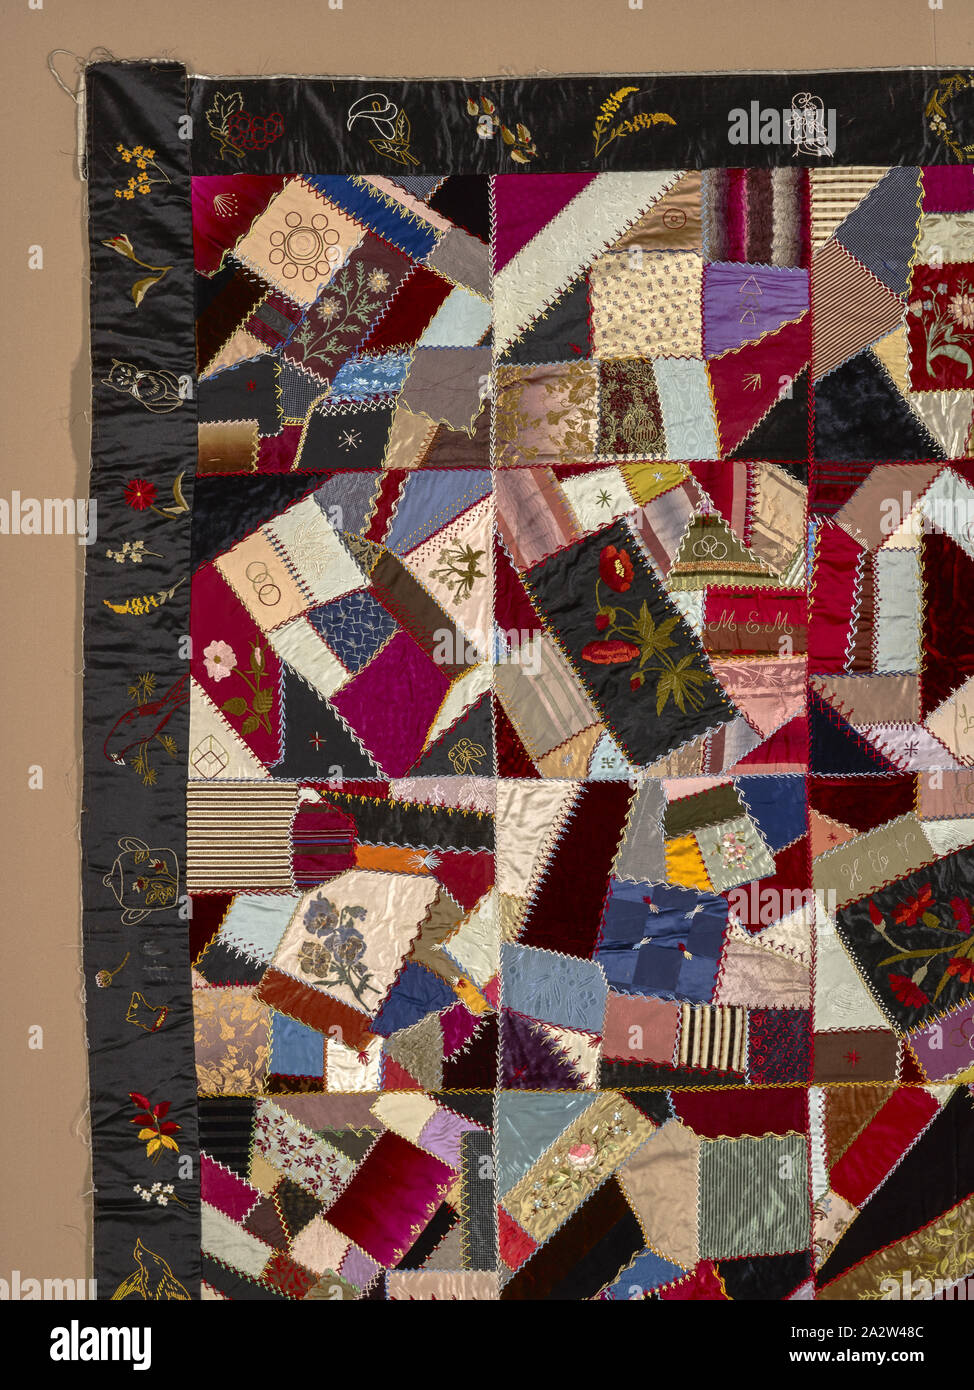 crazy quilt top, Unknown, about 1890, silk and velvet, pieced, embroidered, and painted, 69-1/2 x 70-1/4 in., Sewn, front side, second column from left, second square down: M.E.M. Sewn, front side, third column from left, second square down: L.E.D Sewn, front side, third column from left, third square down, upside down: A.B.H. Sewn, front side, fourth column from left, third square down: E.A.D Sewn, front side, fourth column from left, fourth square down: J.P.M., American, Textile and Fashion Arts Stock Photo